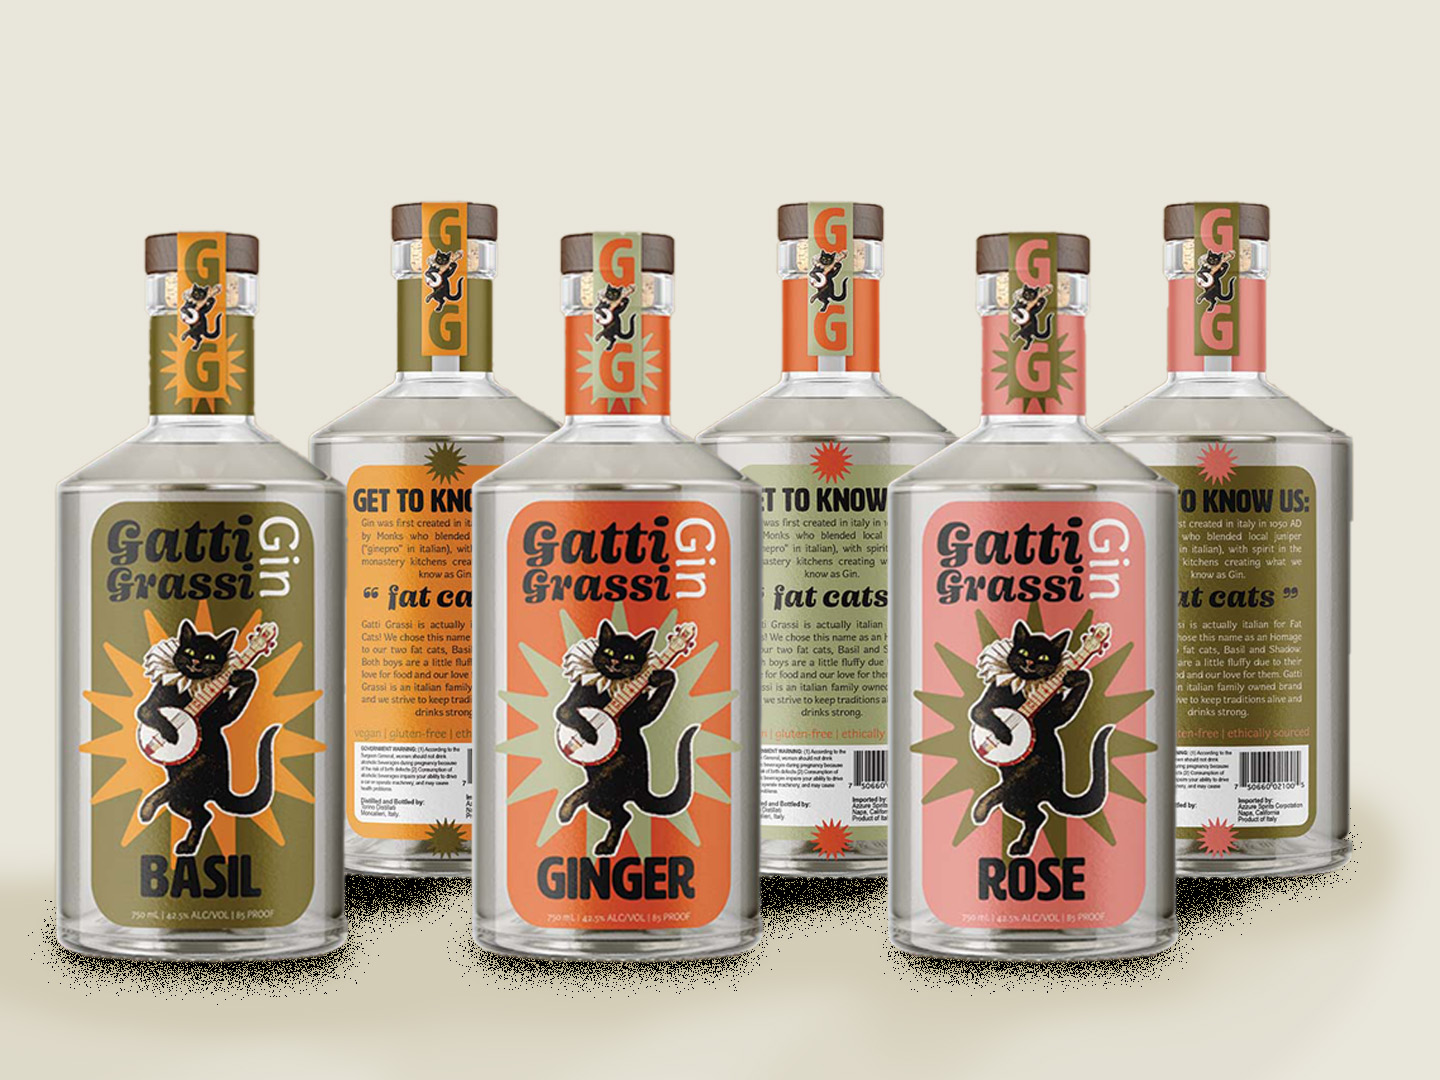  / “Gatti' Grassi Gin” Glass Gin bottle packaging label designs, 2021. This is a packaging design for the Italian gin brand Gatti Grassi, made to catch the eye of the target audience. 